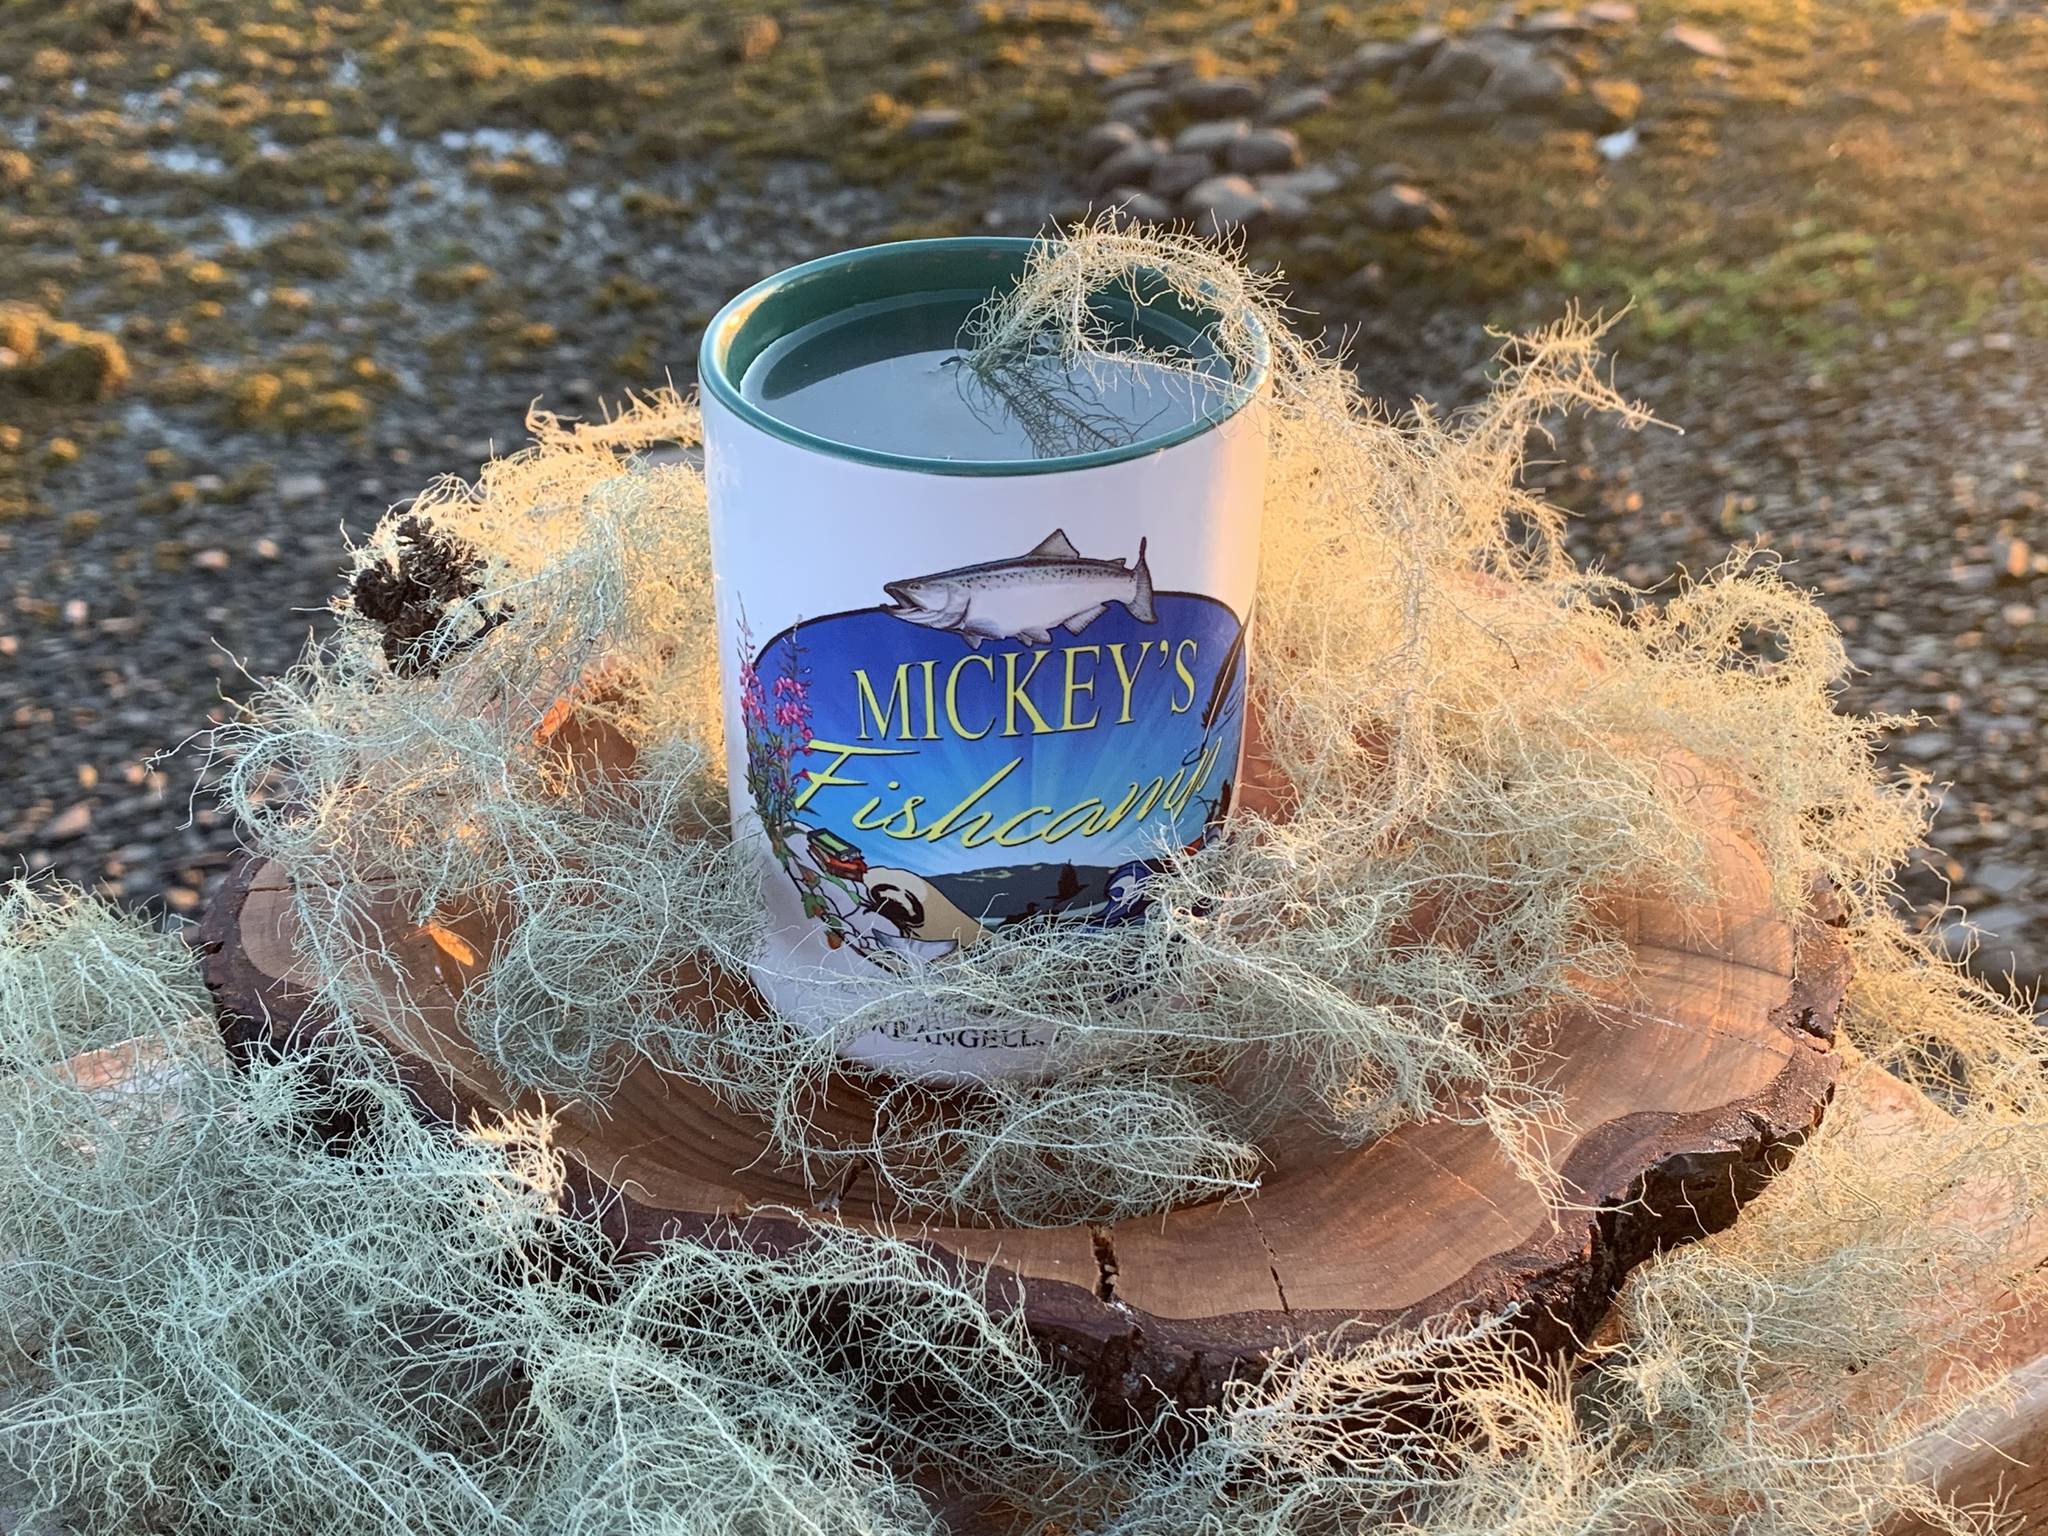 This Usnea tea was made at Mickey’s Fishcamp in Wrangell.